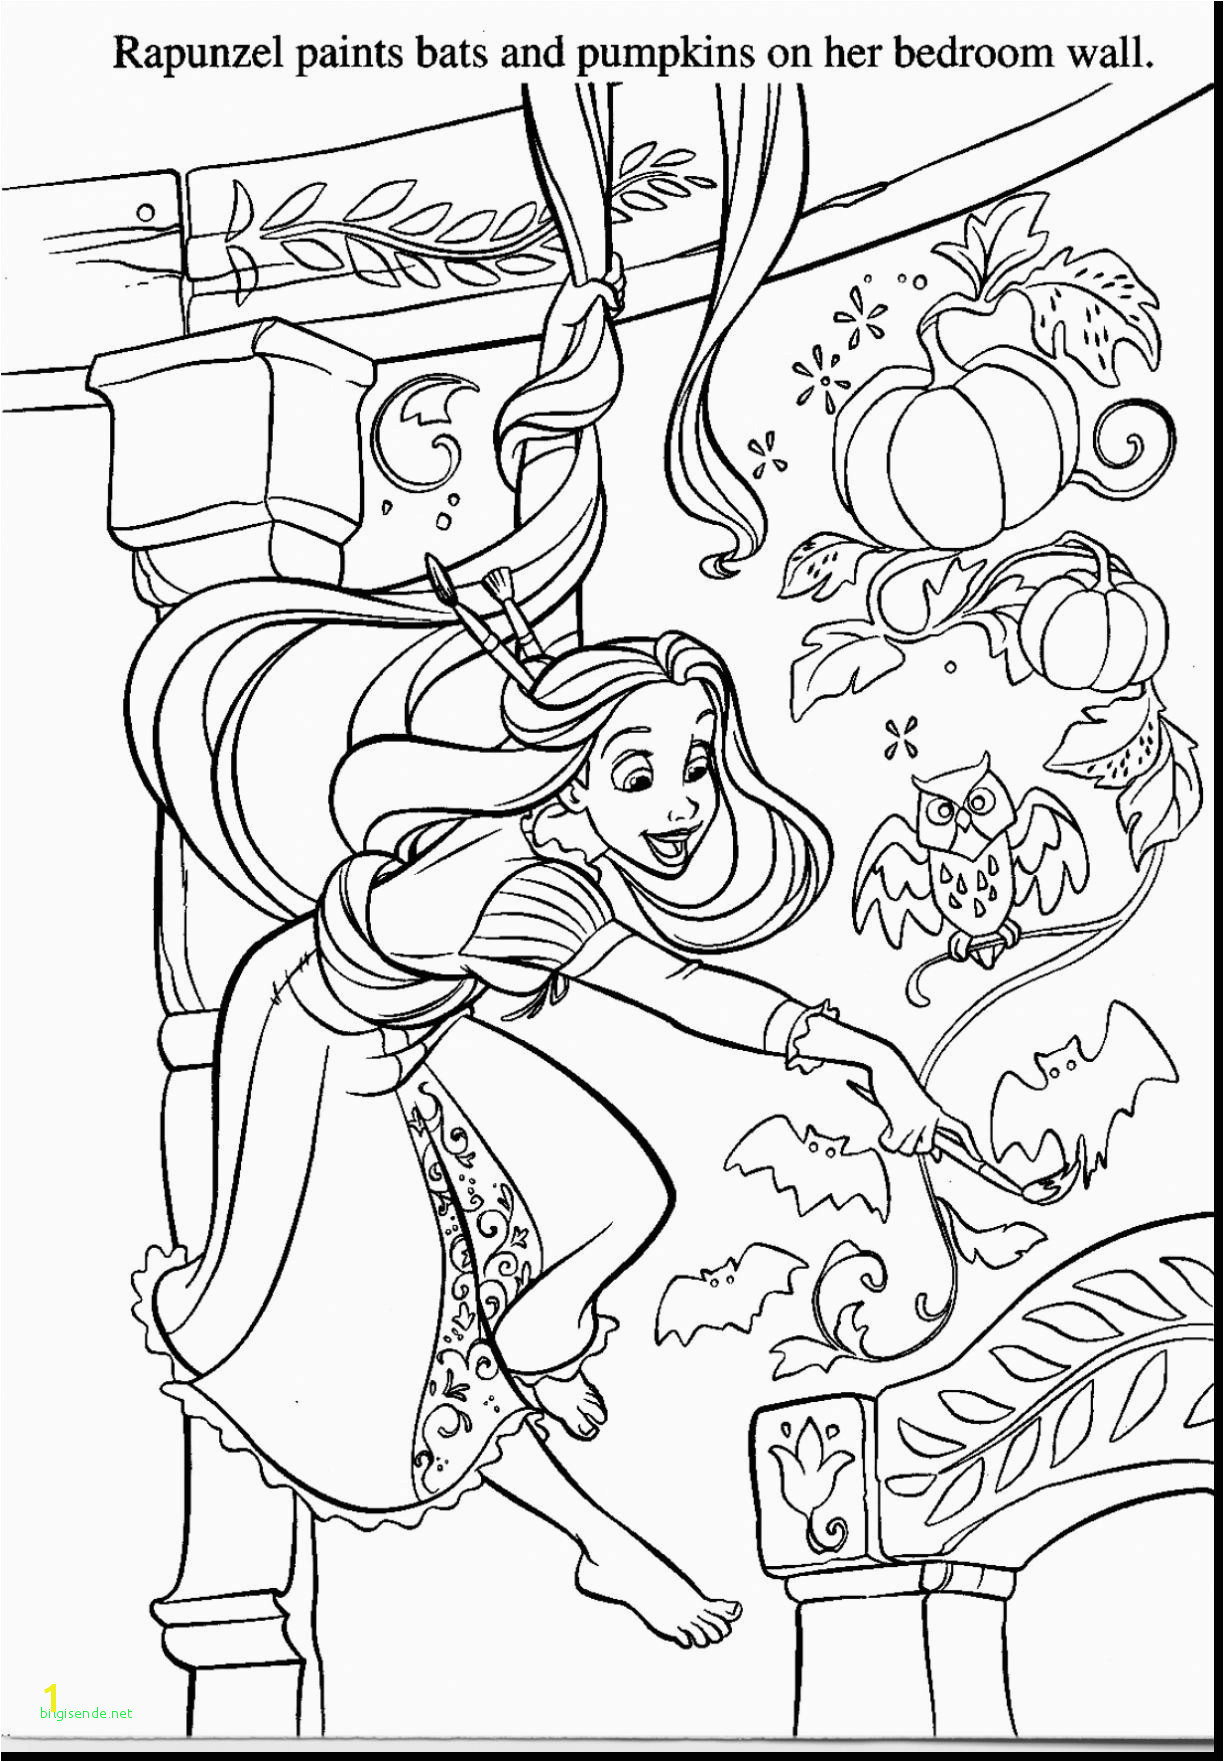 Disney Jr Color Pages Beautiful Disney Junior Coloring Pages Miles From tomorrowland